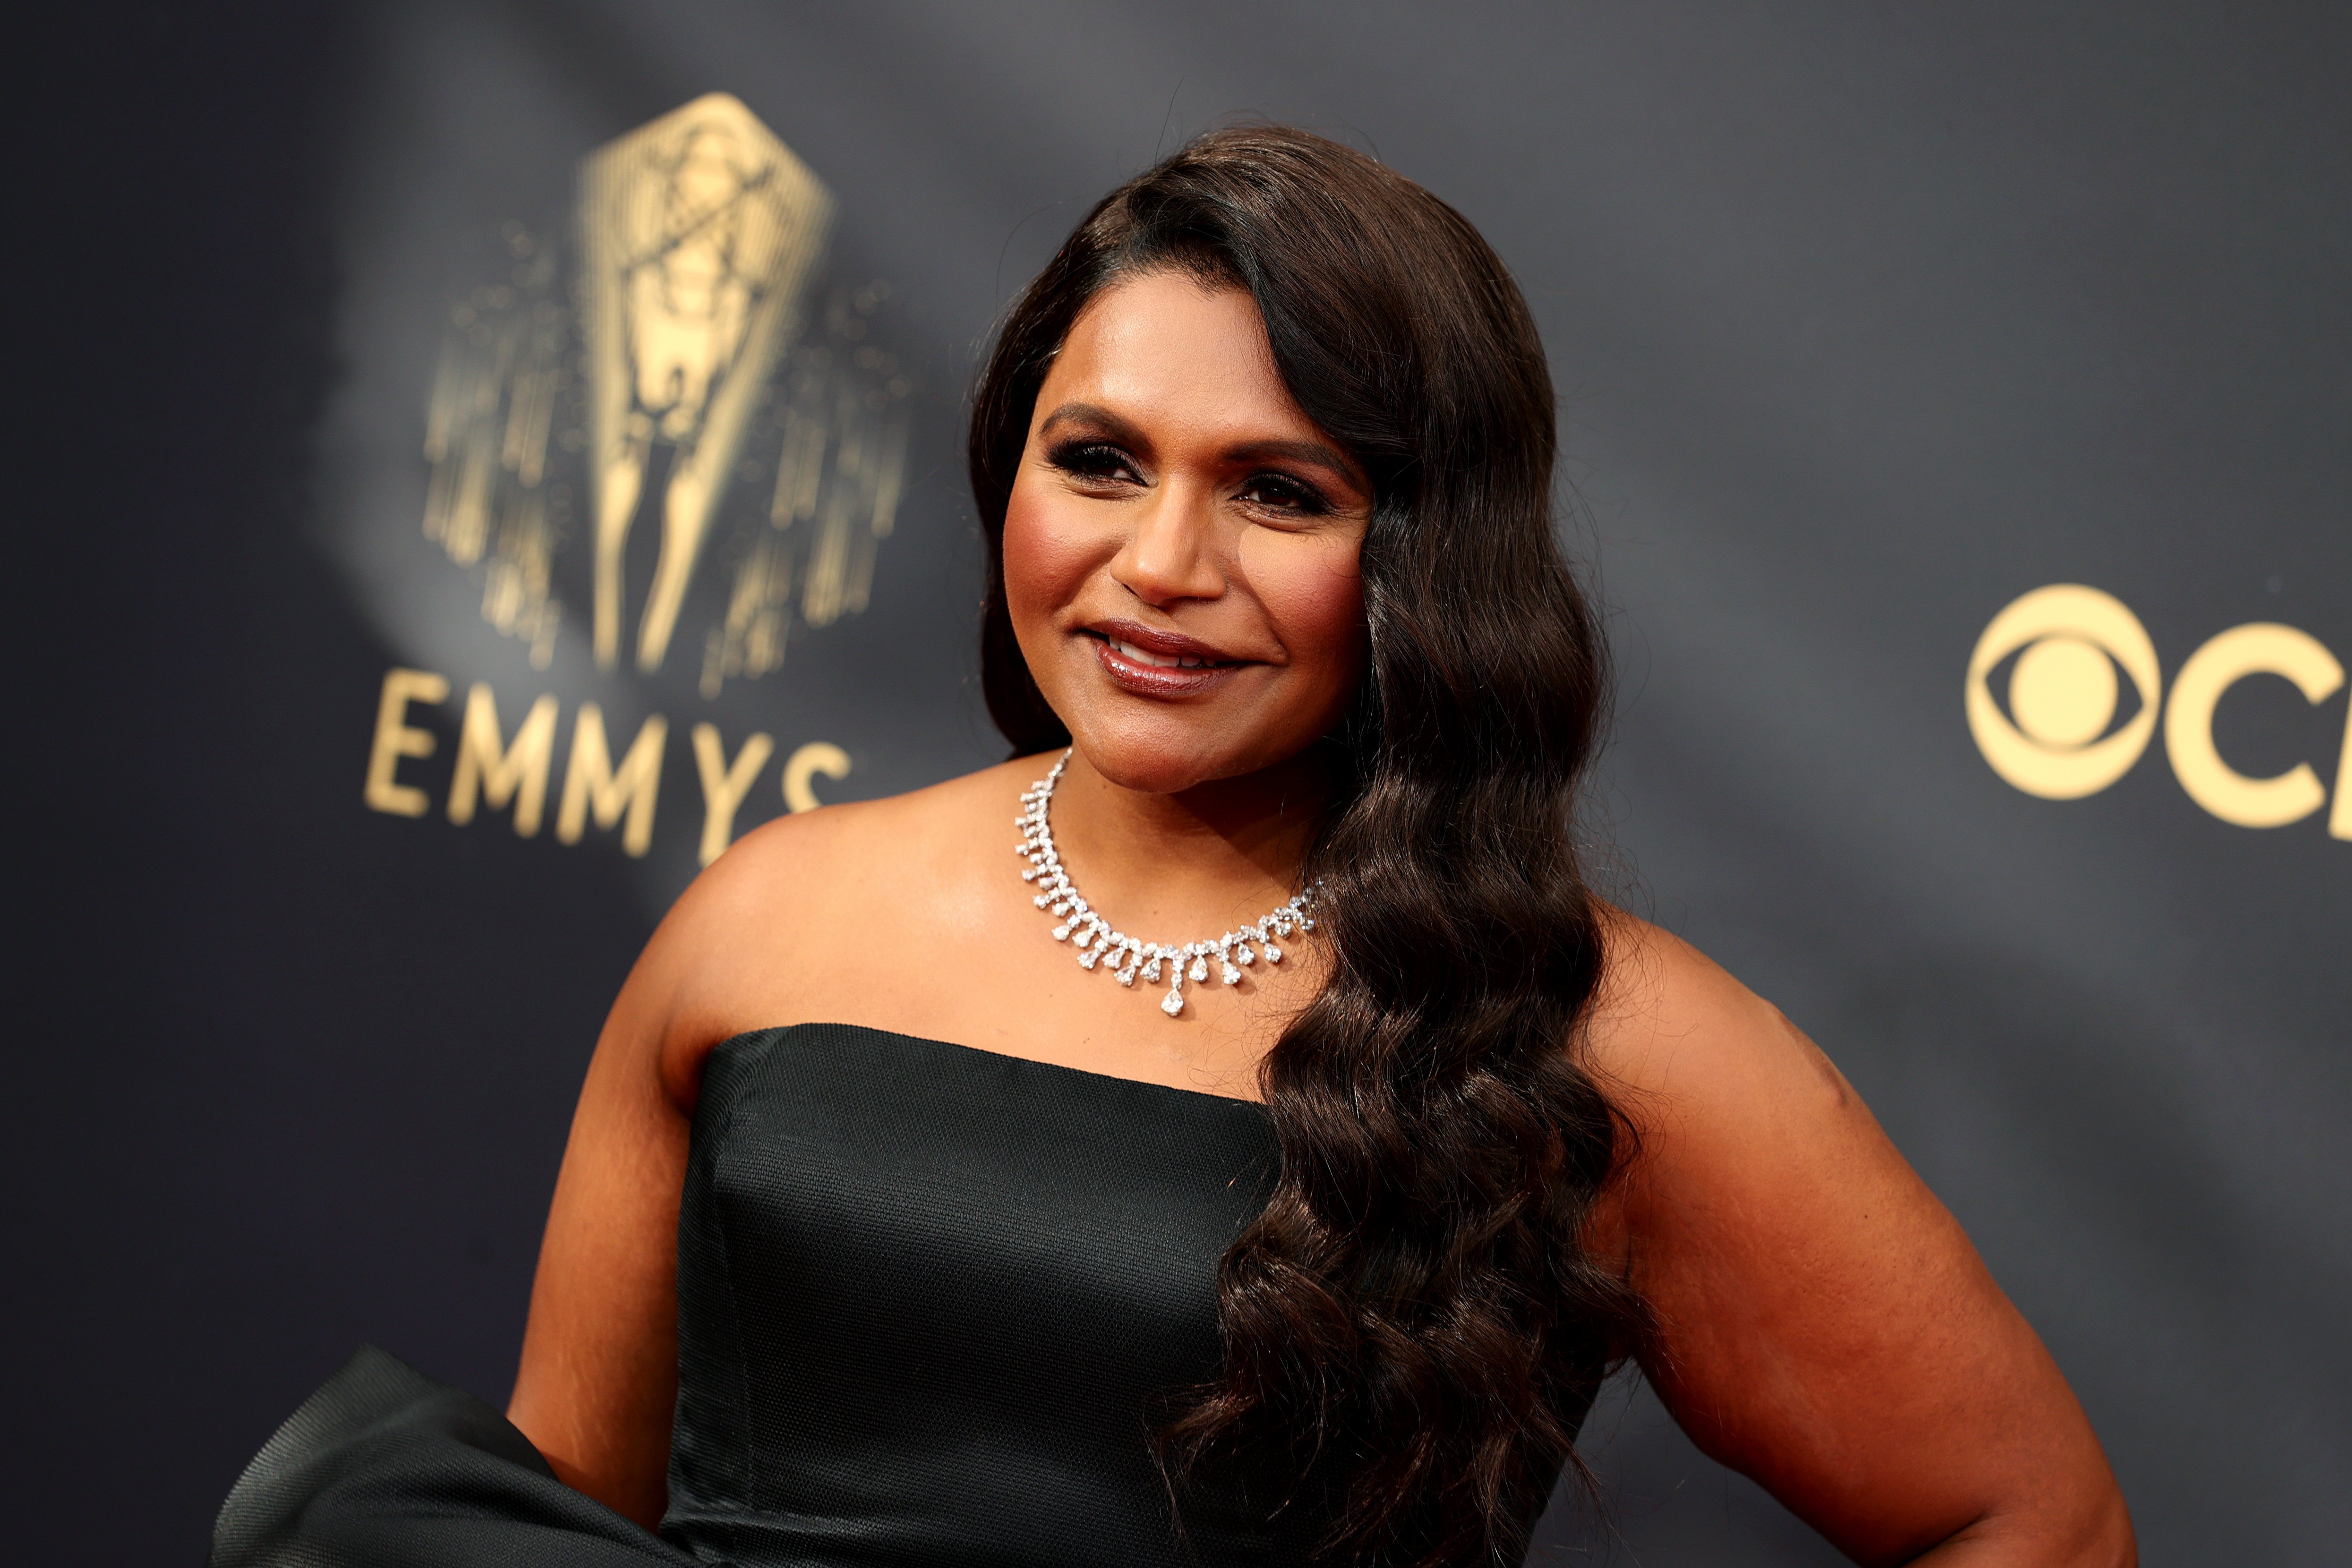 Mindy Kaling at the 73rd Primetime Emmy Awards in September 2021 in Los Angeles. | Source: Getty Images